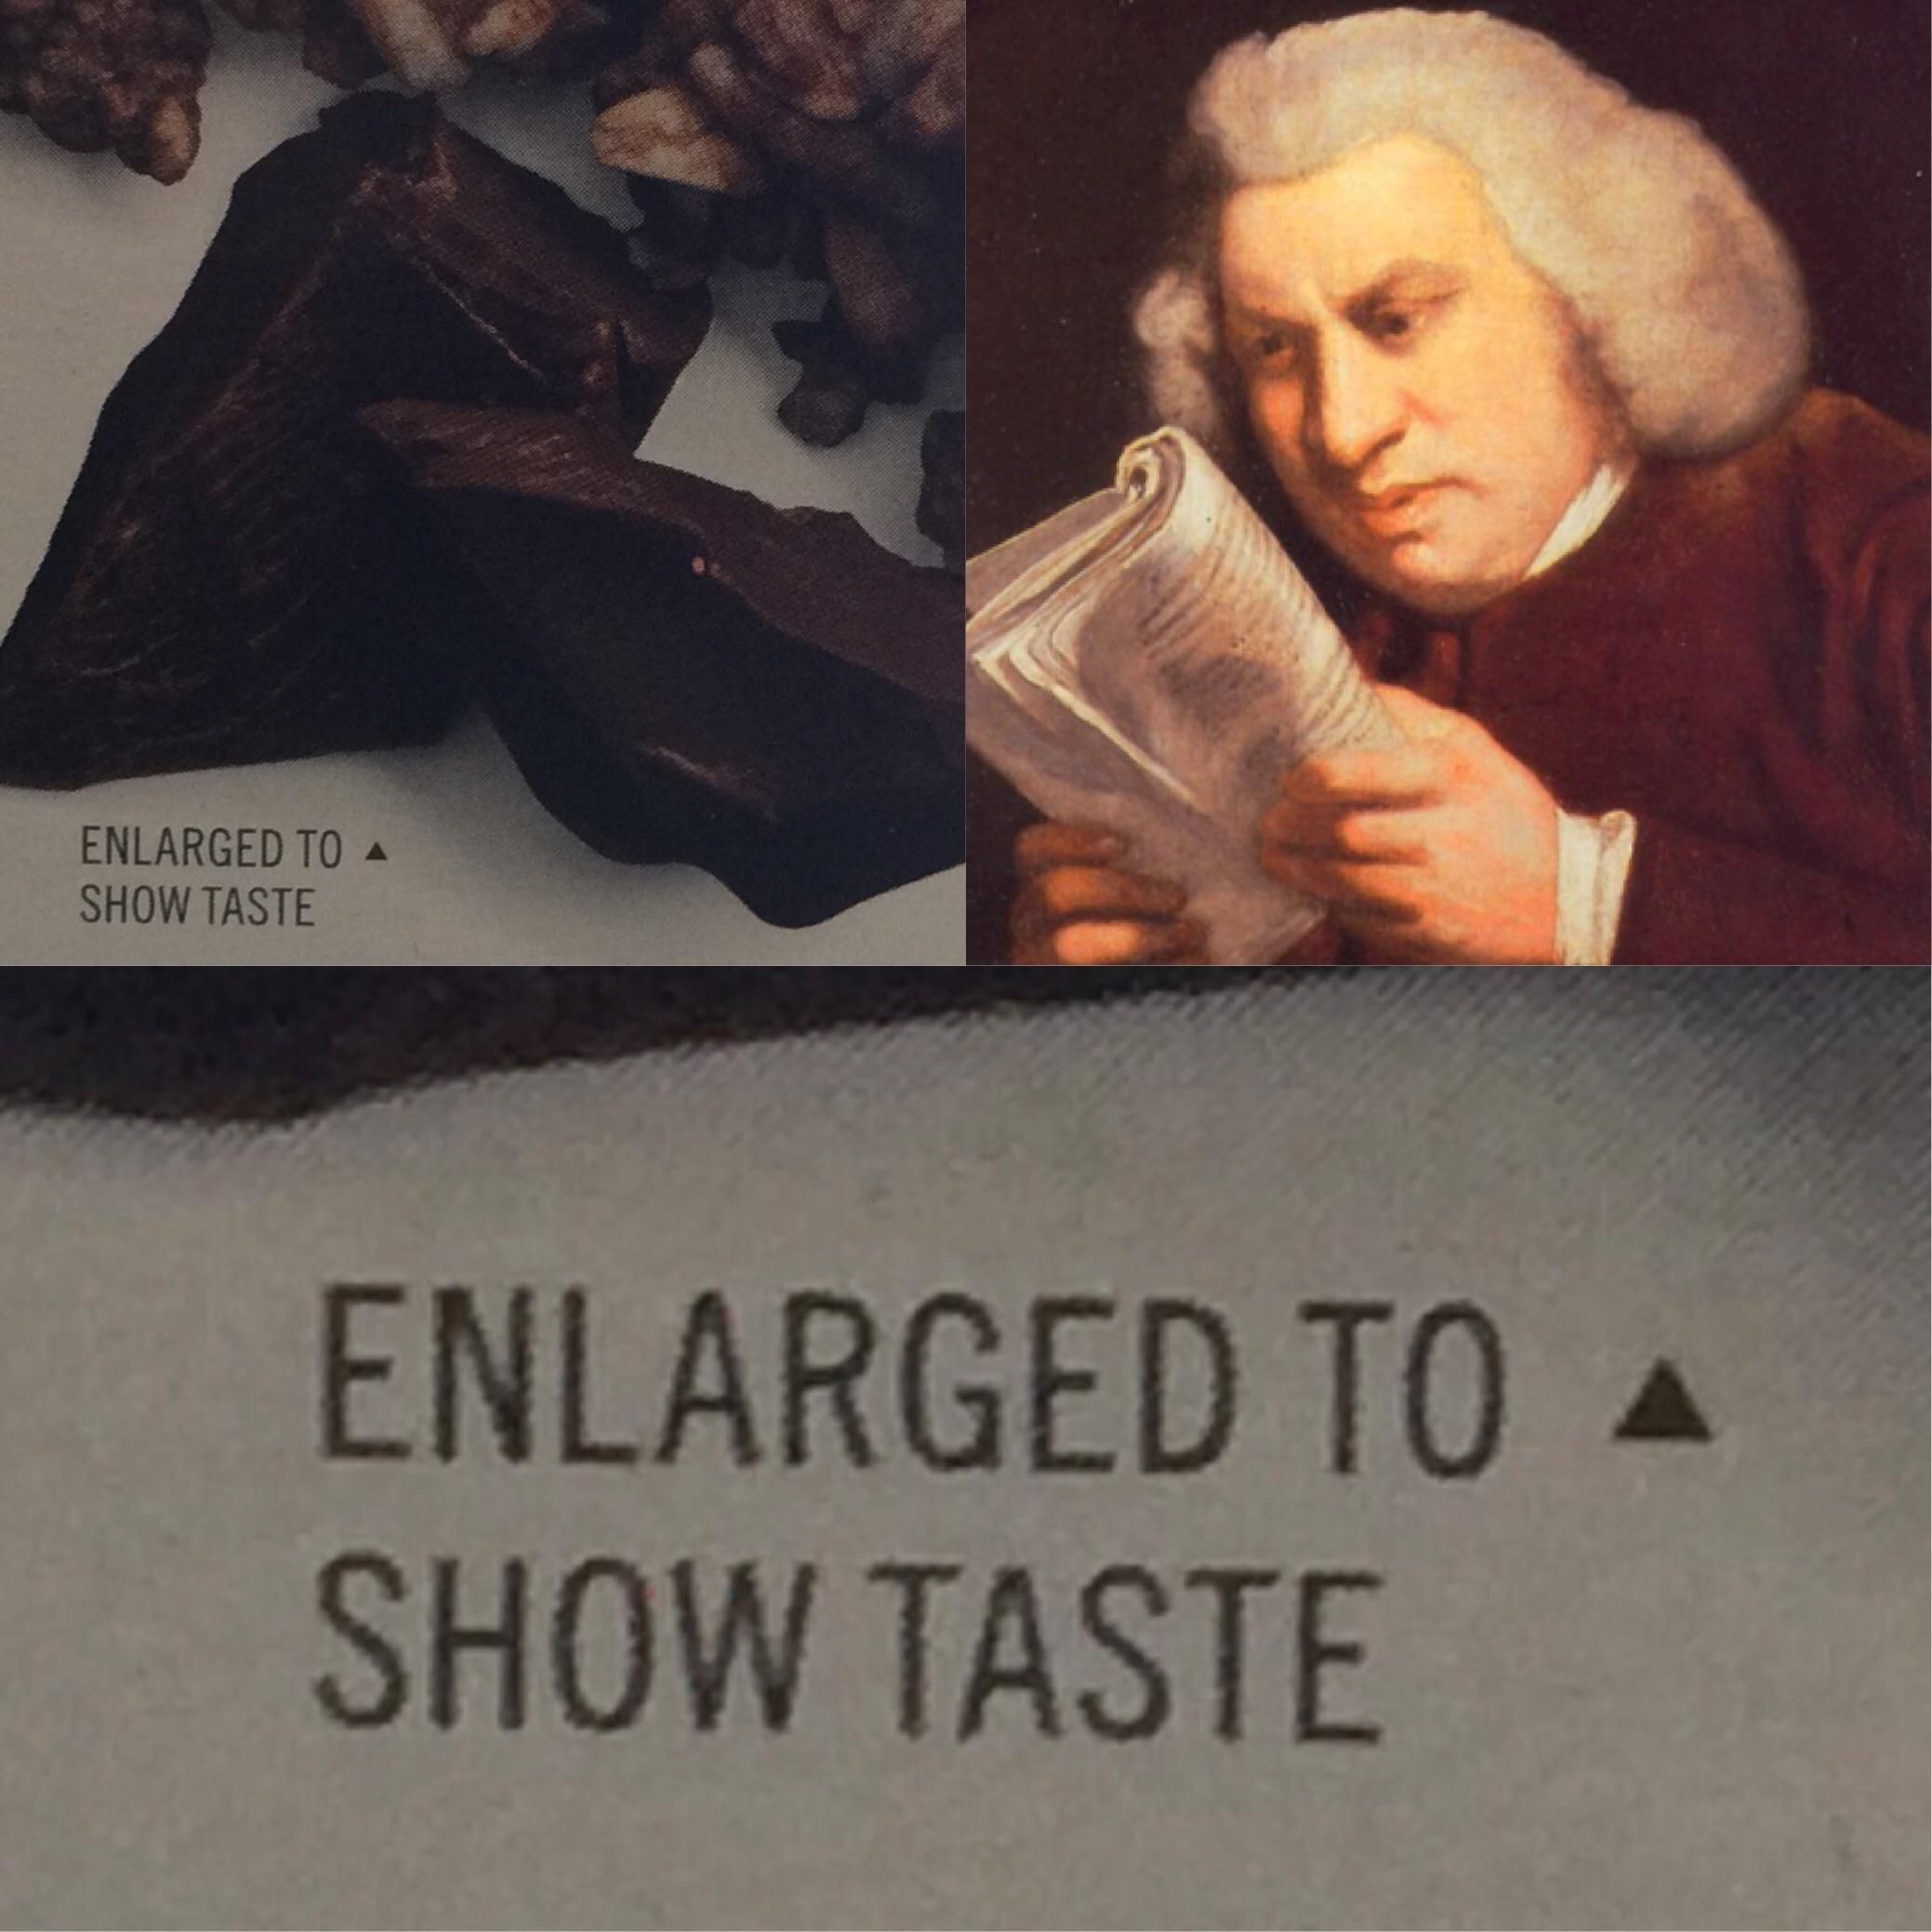 How does one show taste?